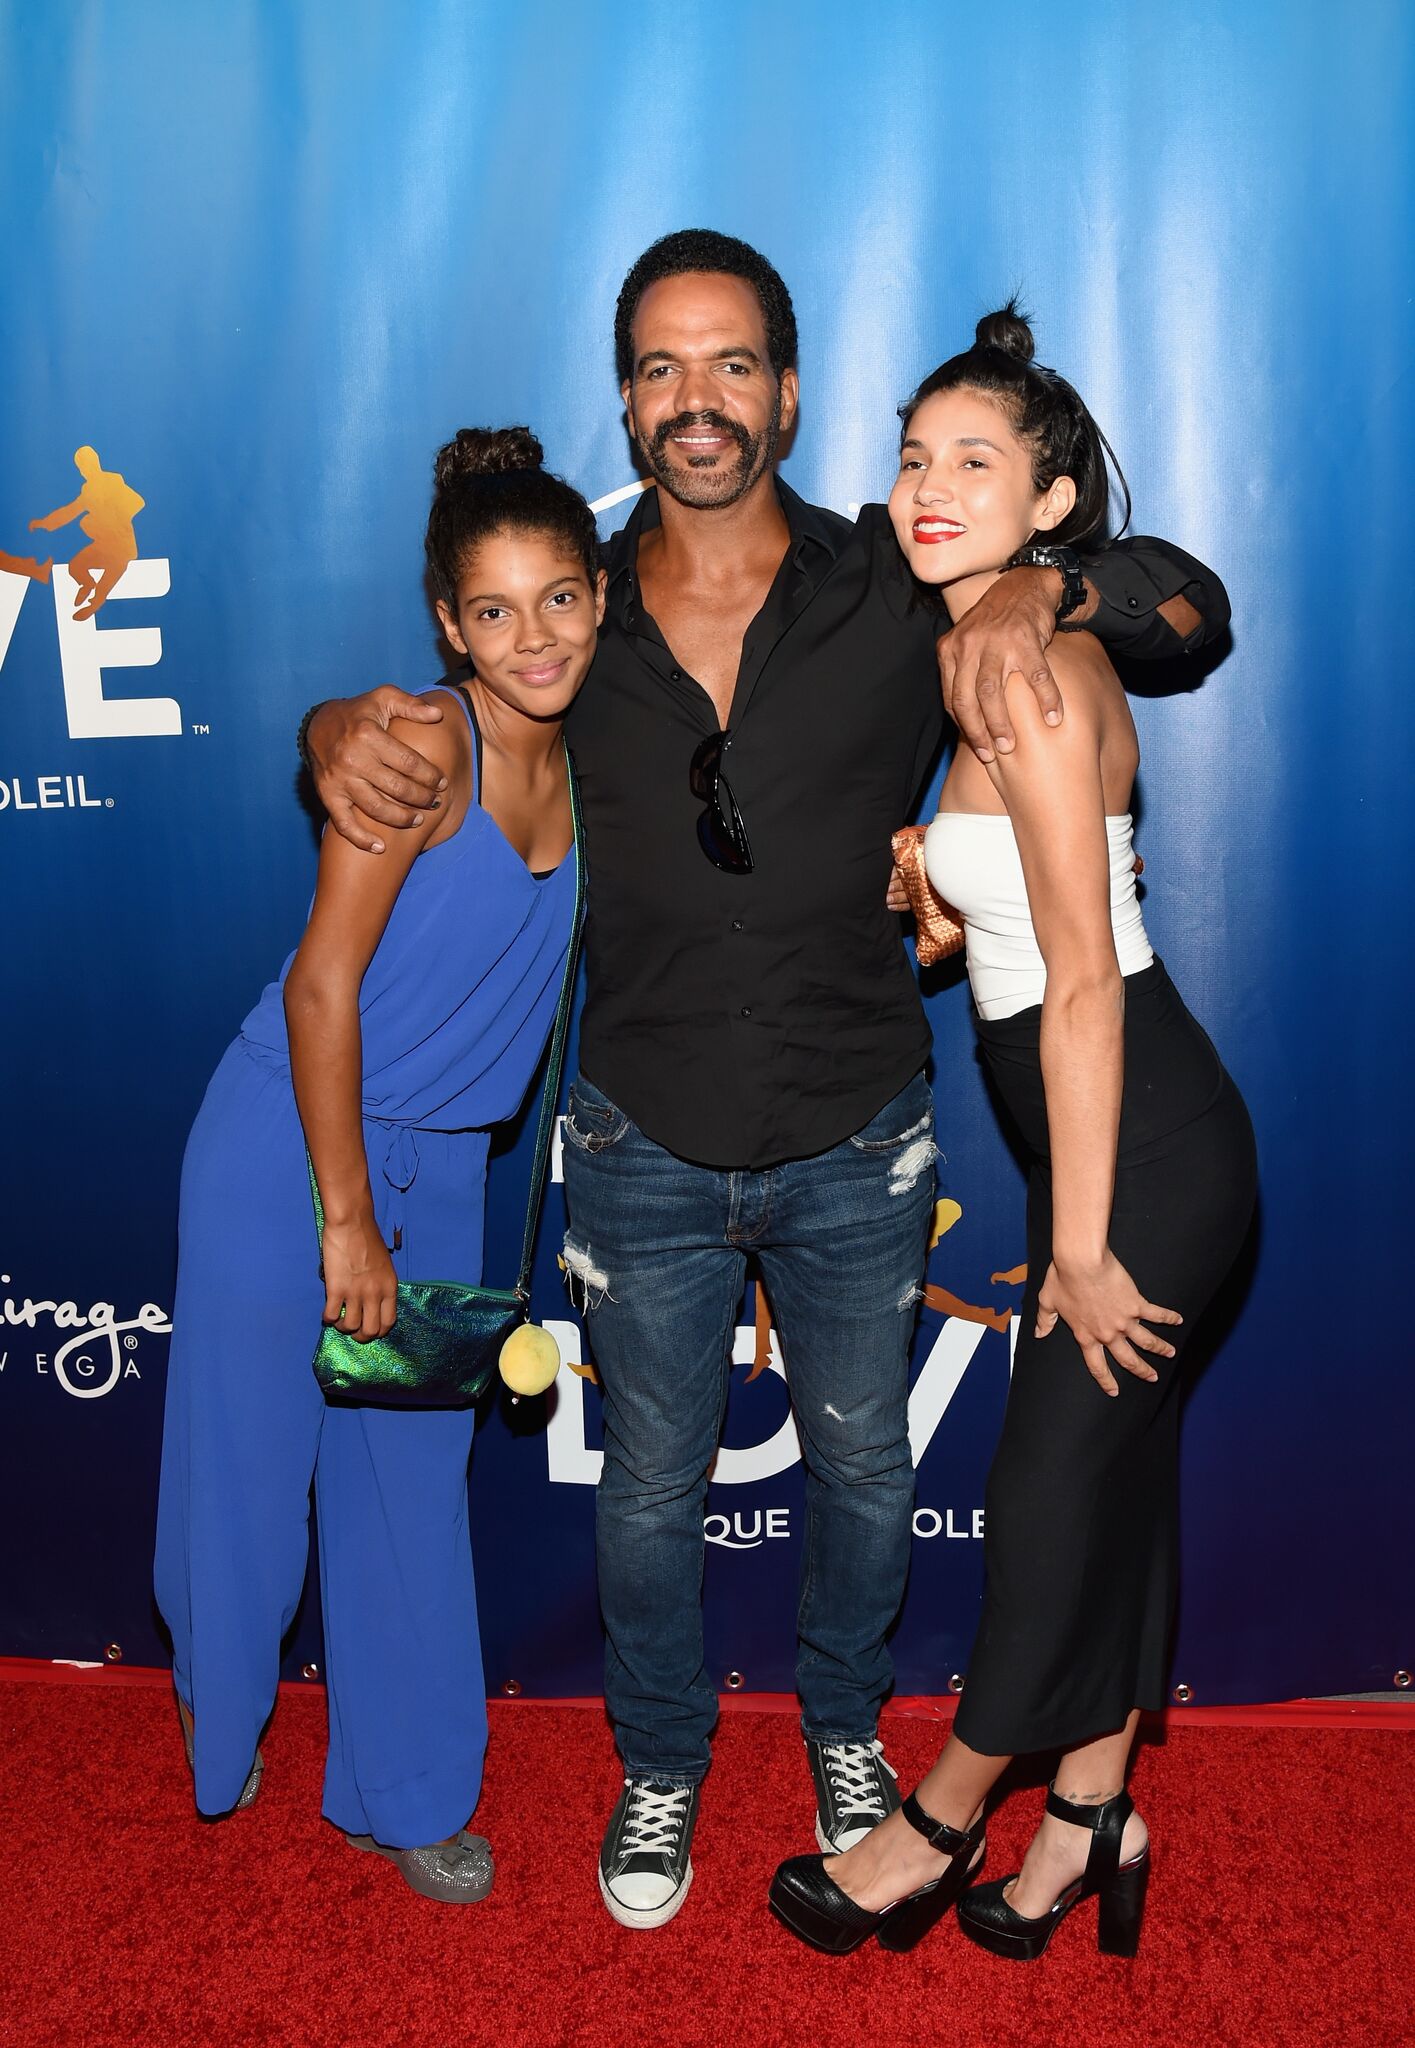 Lola St. John, actor Kristoff St. John and Paris St. John attend the 10th anniversary celebration of "The Beatles LOVE by Cirque du Soleil"  | Getty Images